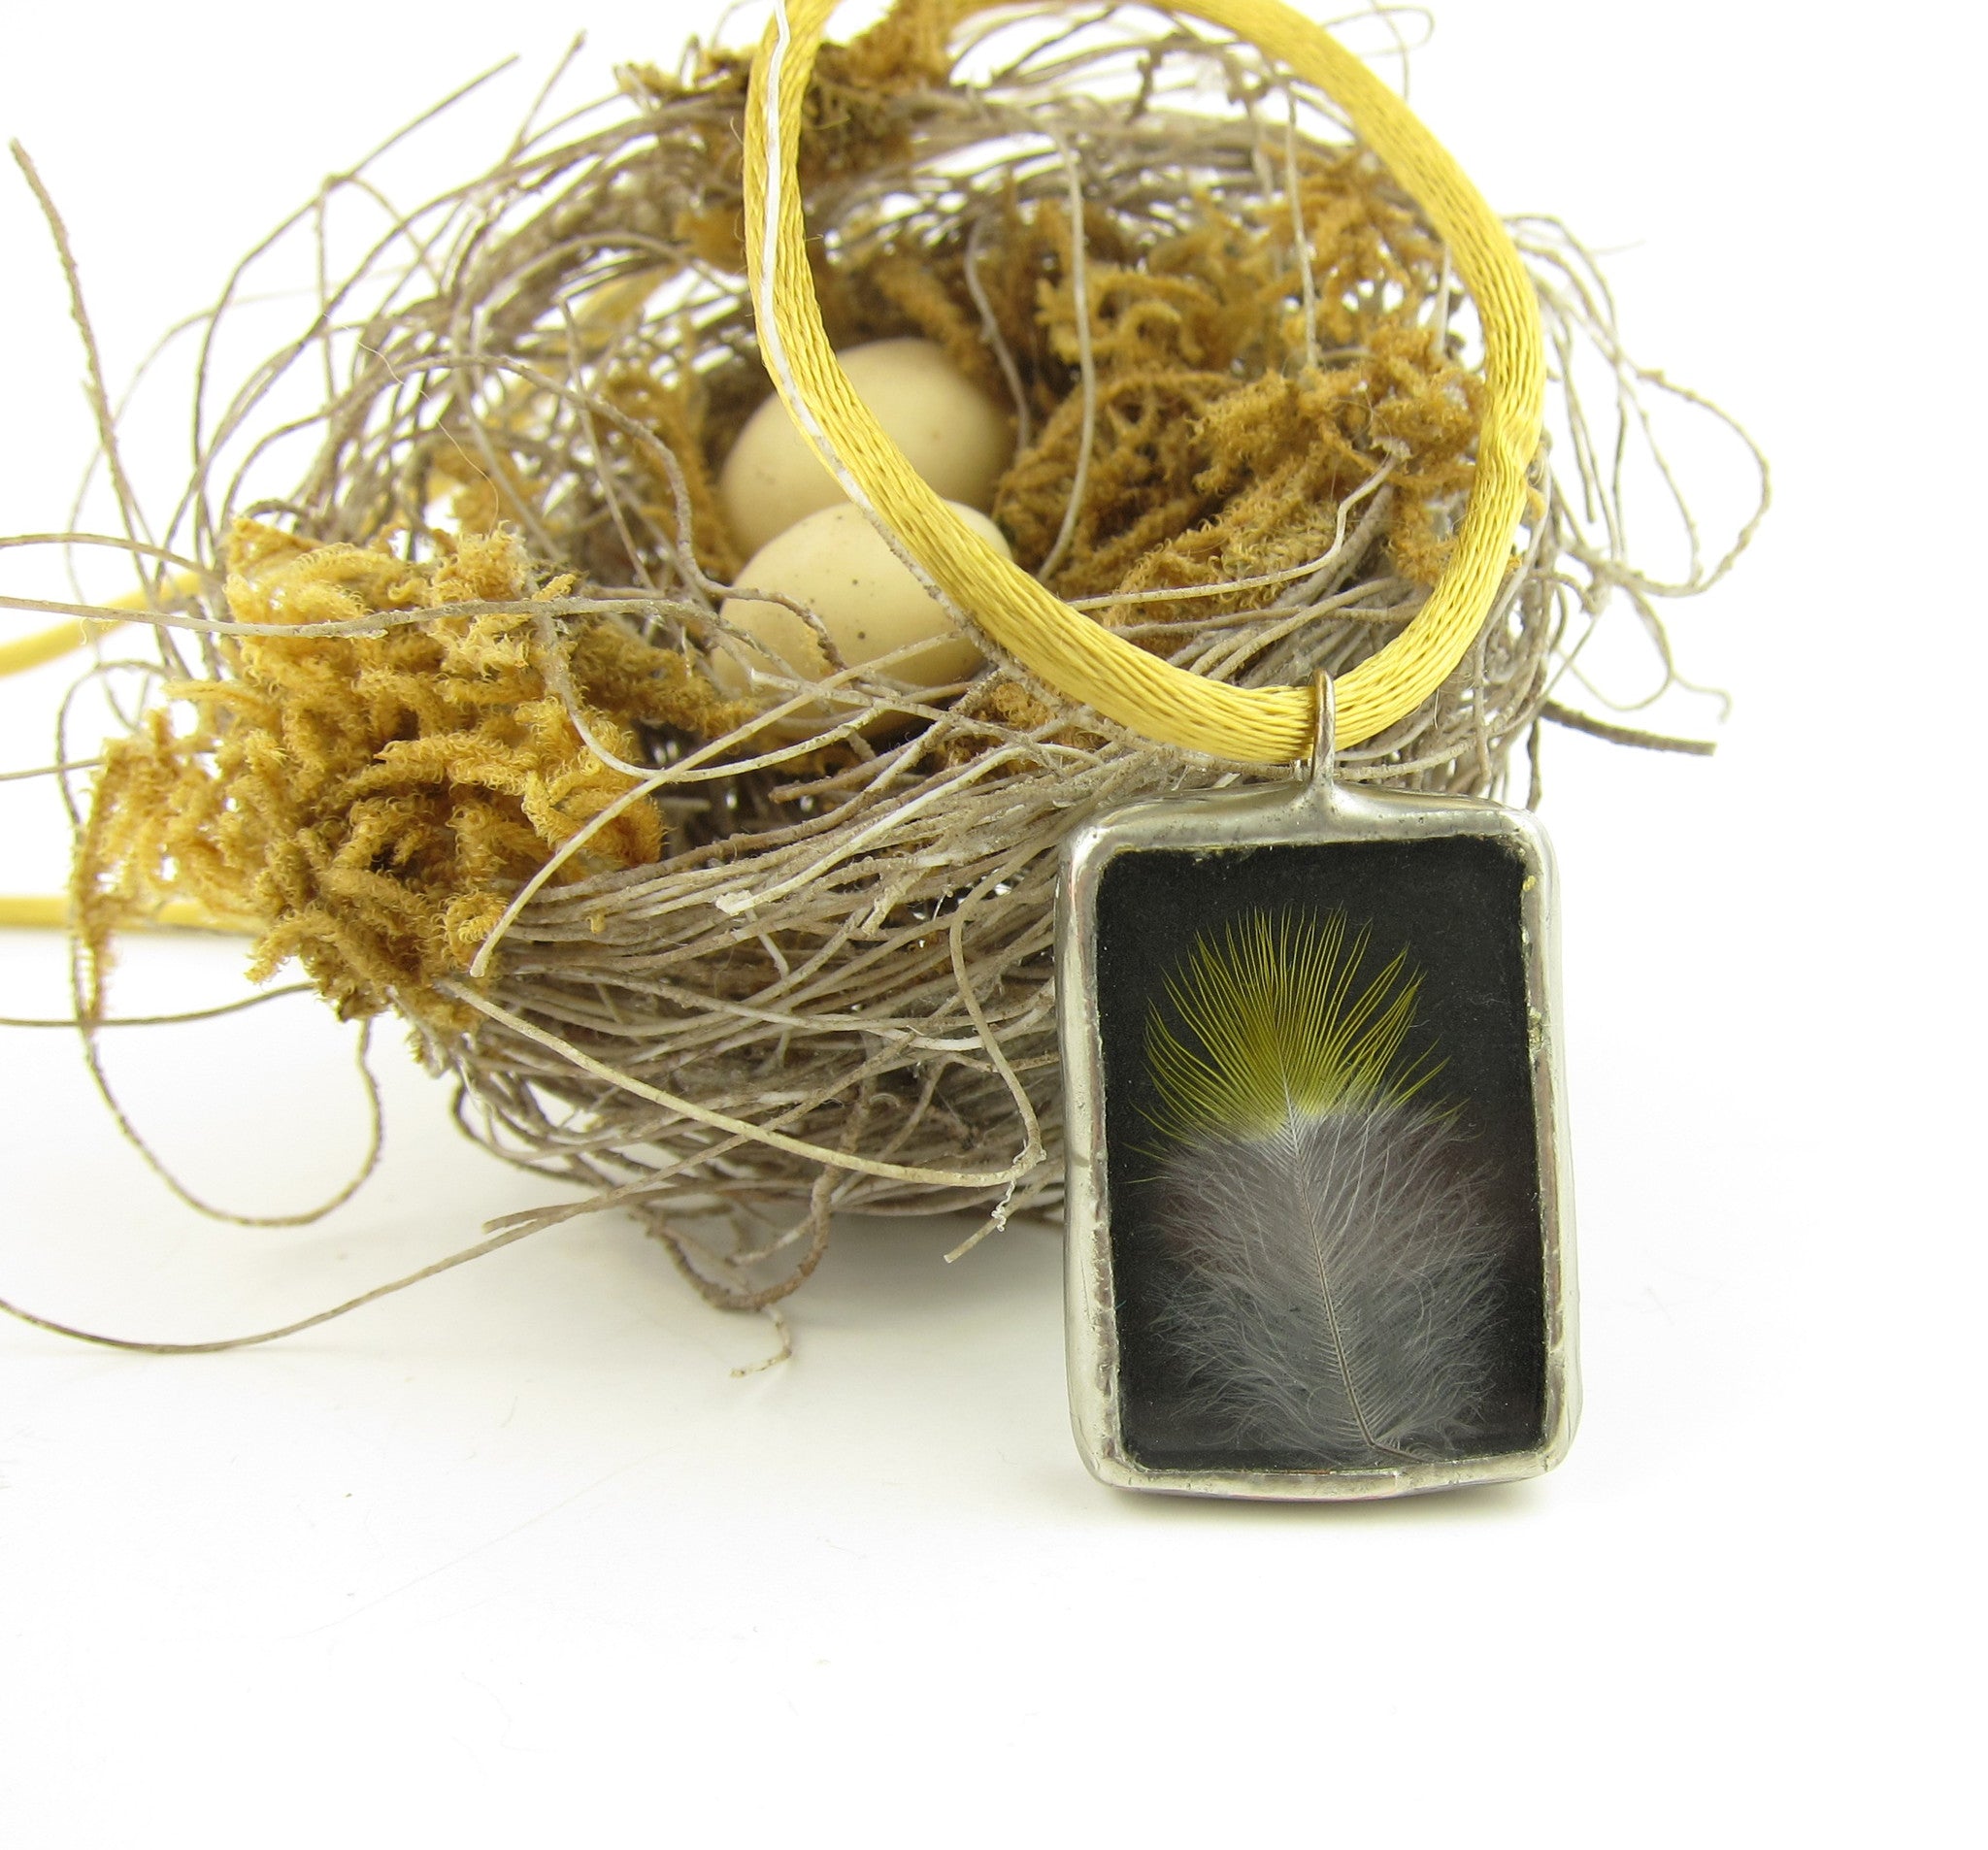 A real bird feather is sandwiched between glass salvaged from a broken window in this soldered pendant necklace.